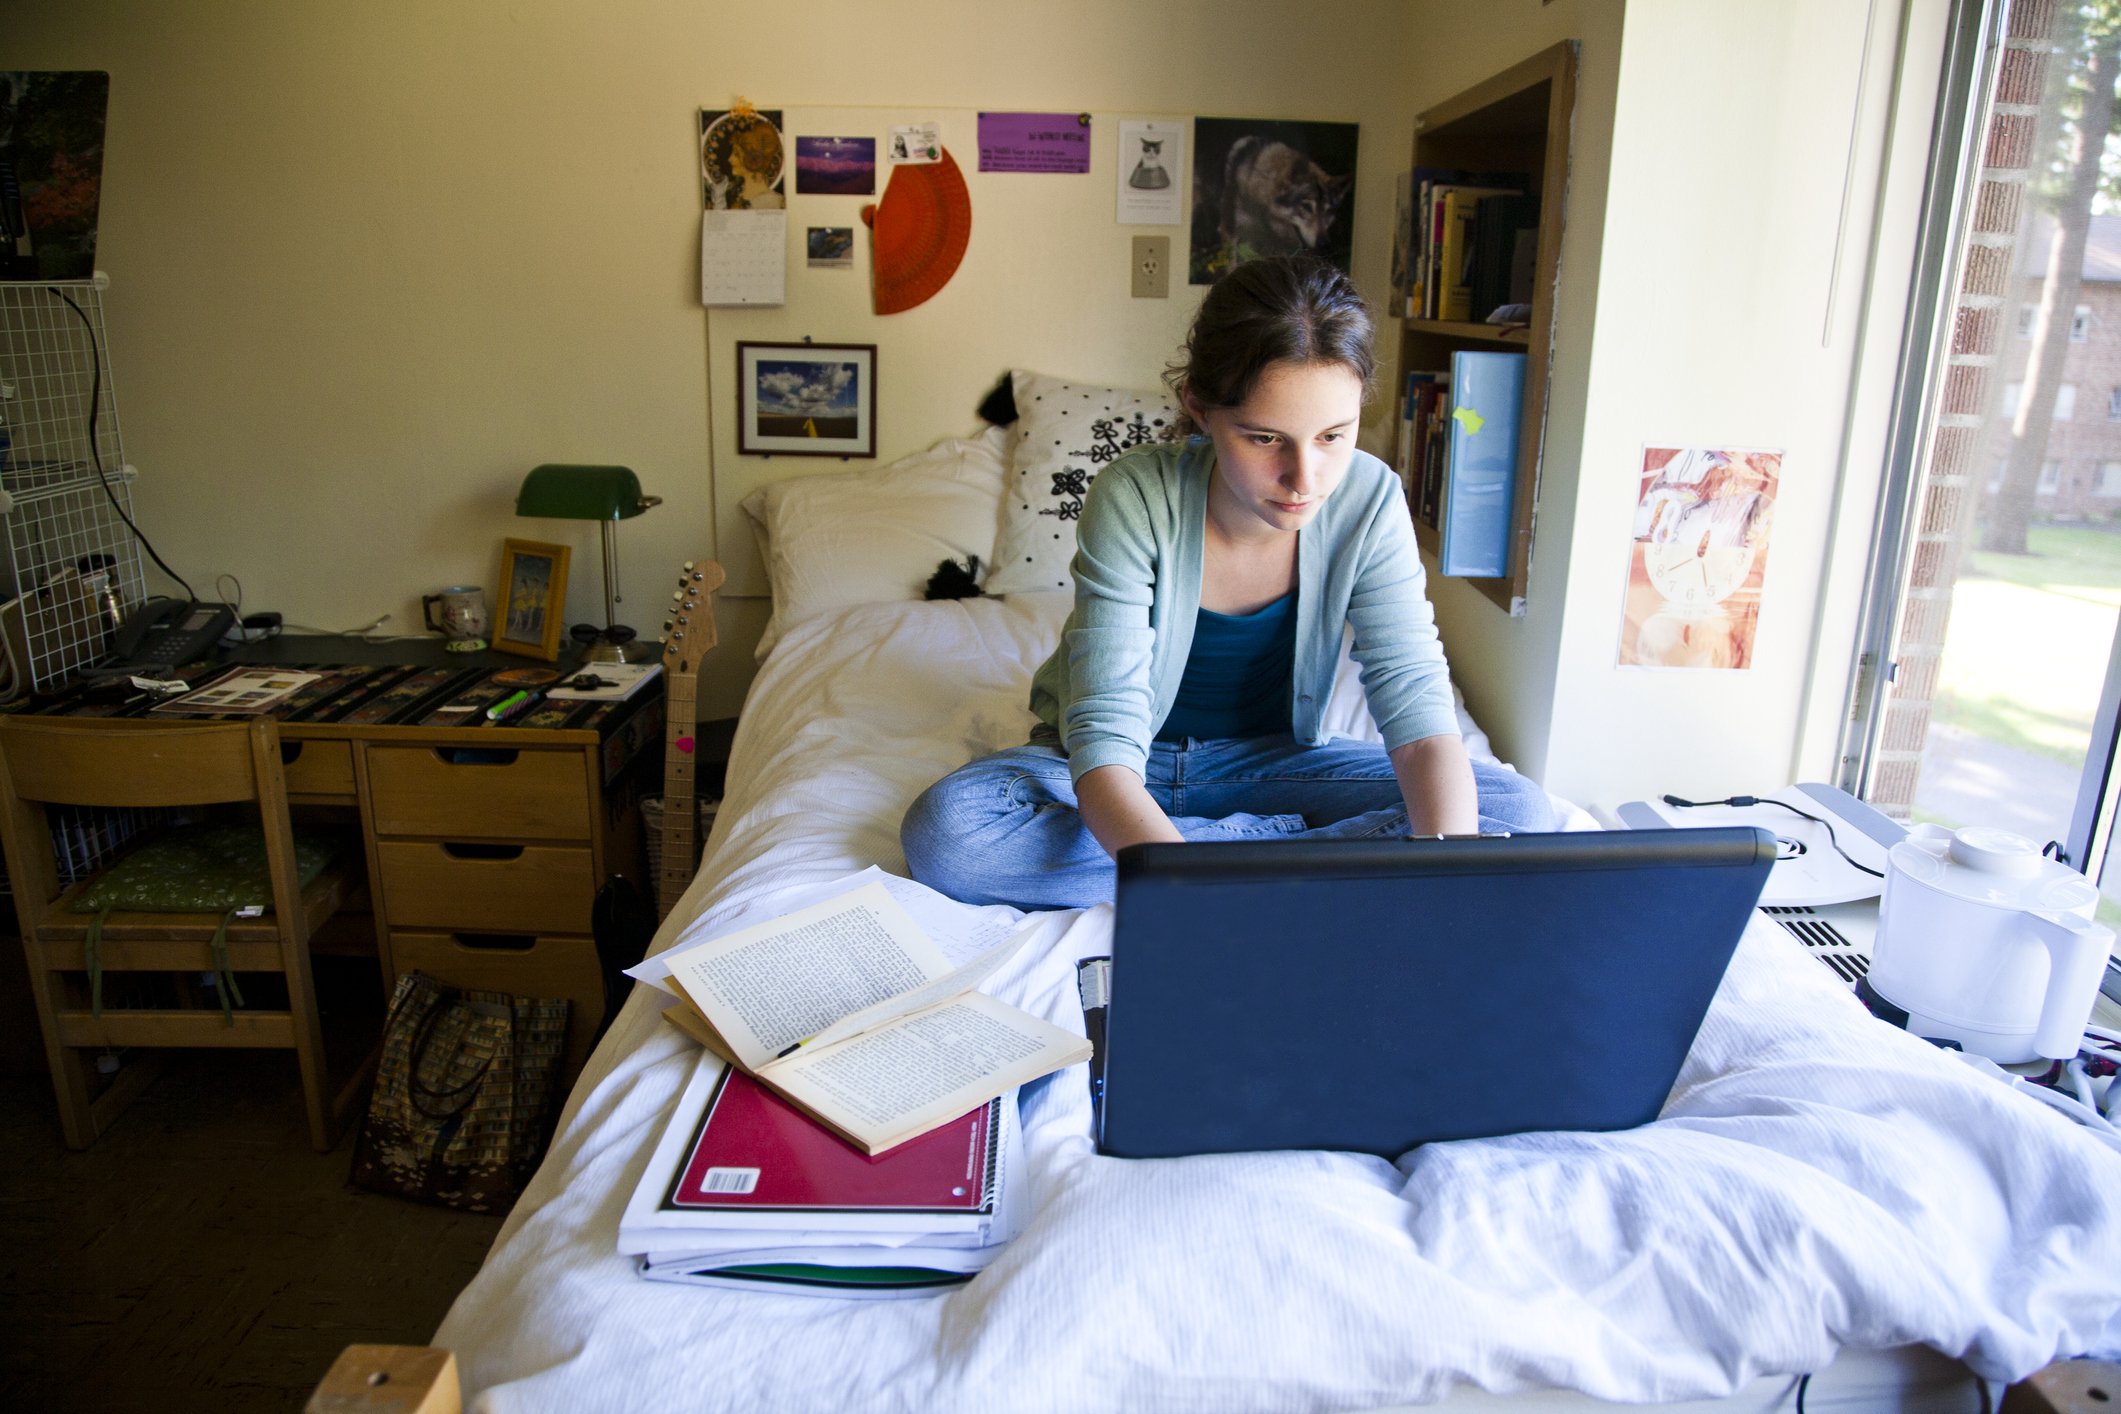 Female college student in her dorm room working on computer